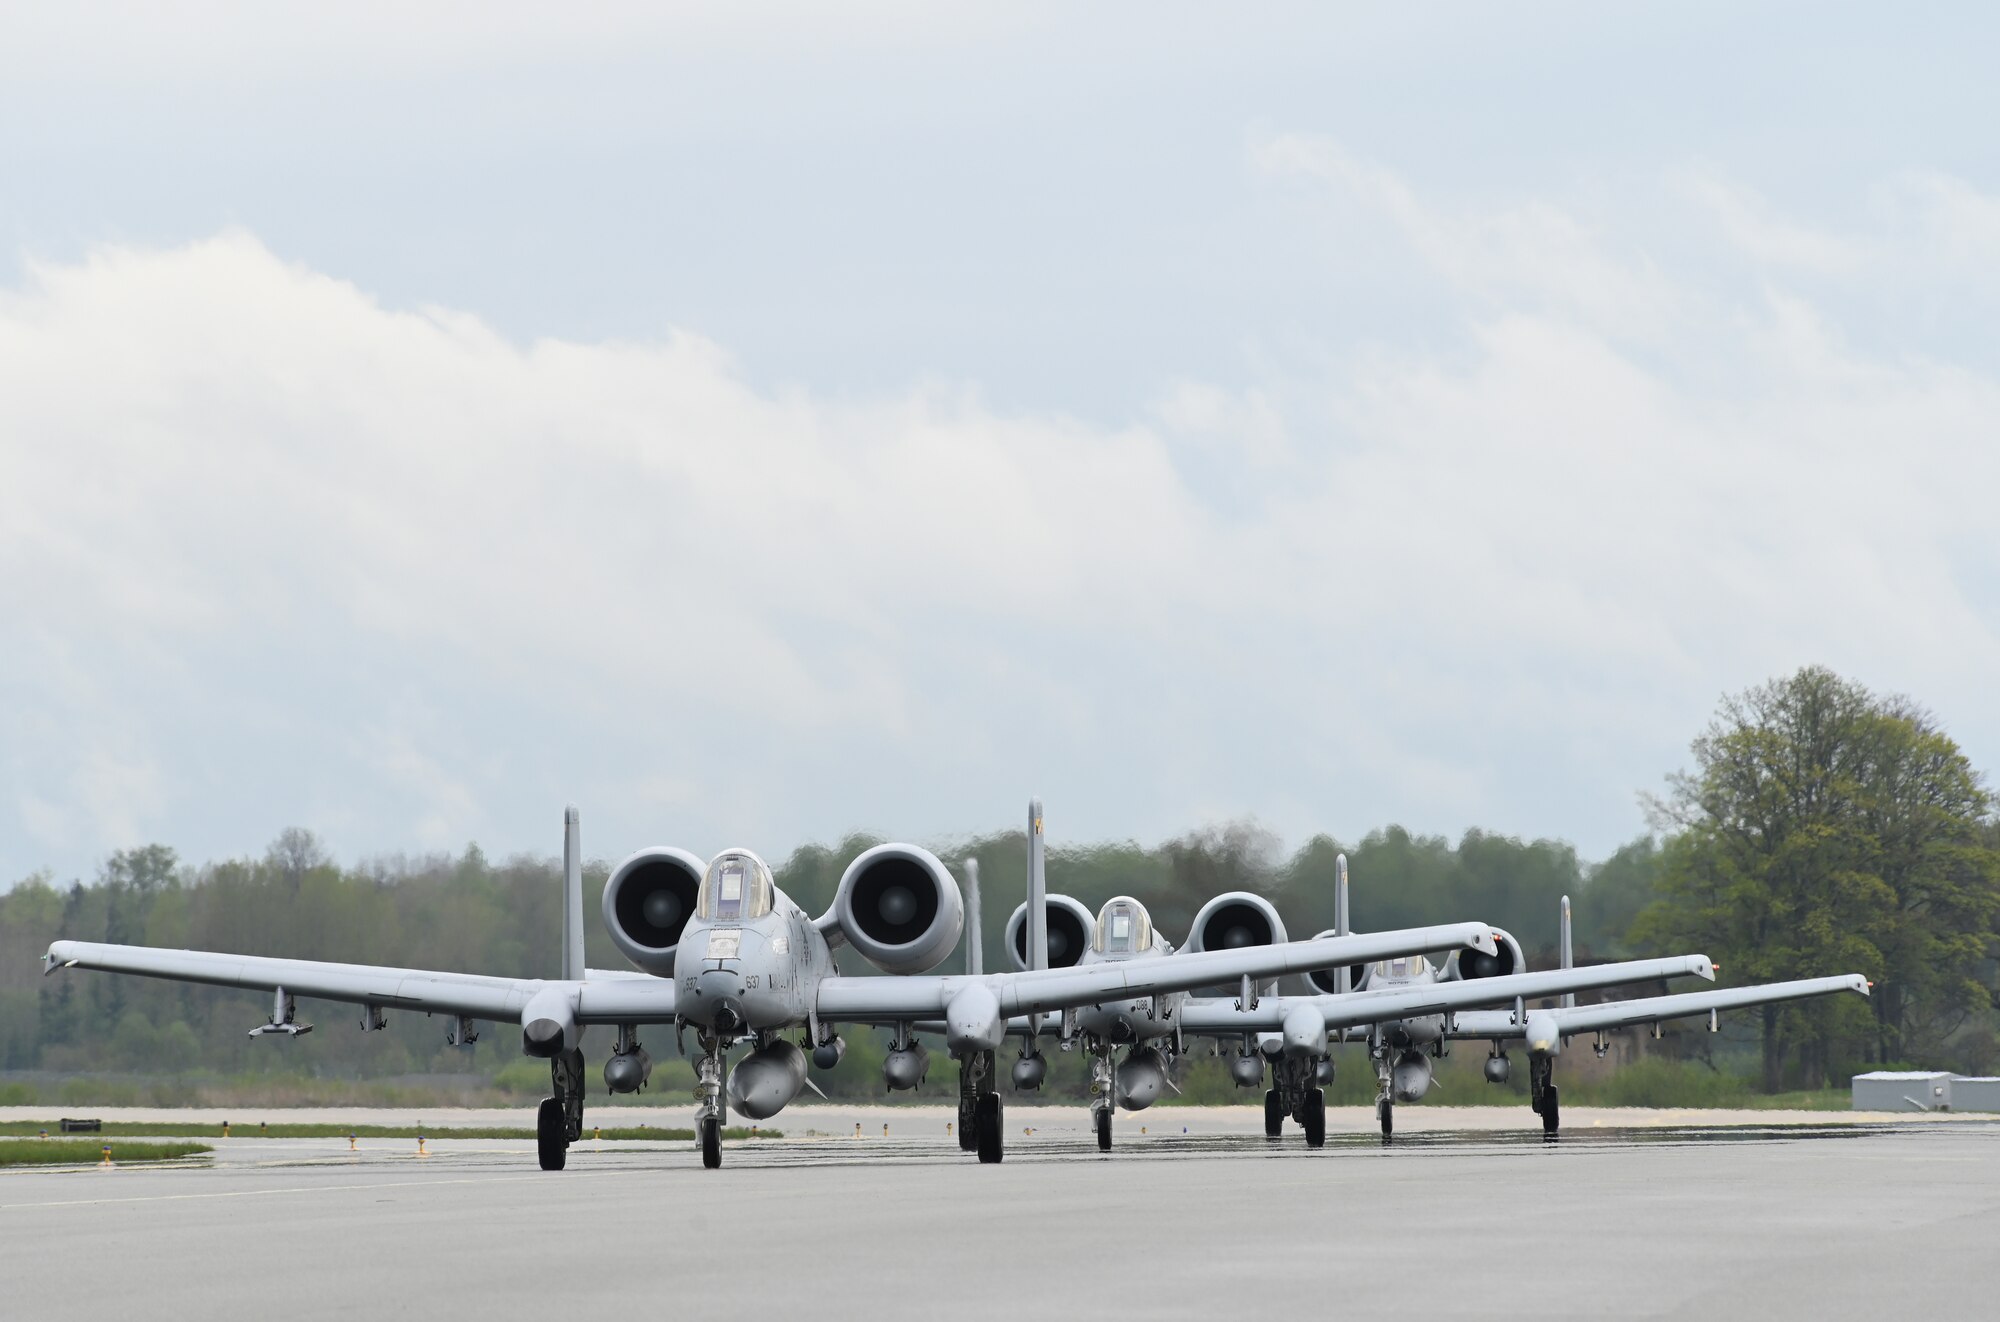 Three A-10C Thunderbolt II aircraft assigned to the 104th Fighter Squadron, Maryland Air National Guard, arrive at Lielvārde Air Base, located in the Vidzeme region of Latvia, May 14, 2022, for agile combat employment training during DEFENDER-Europe 22.